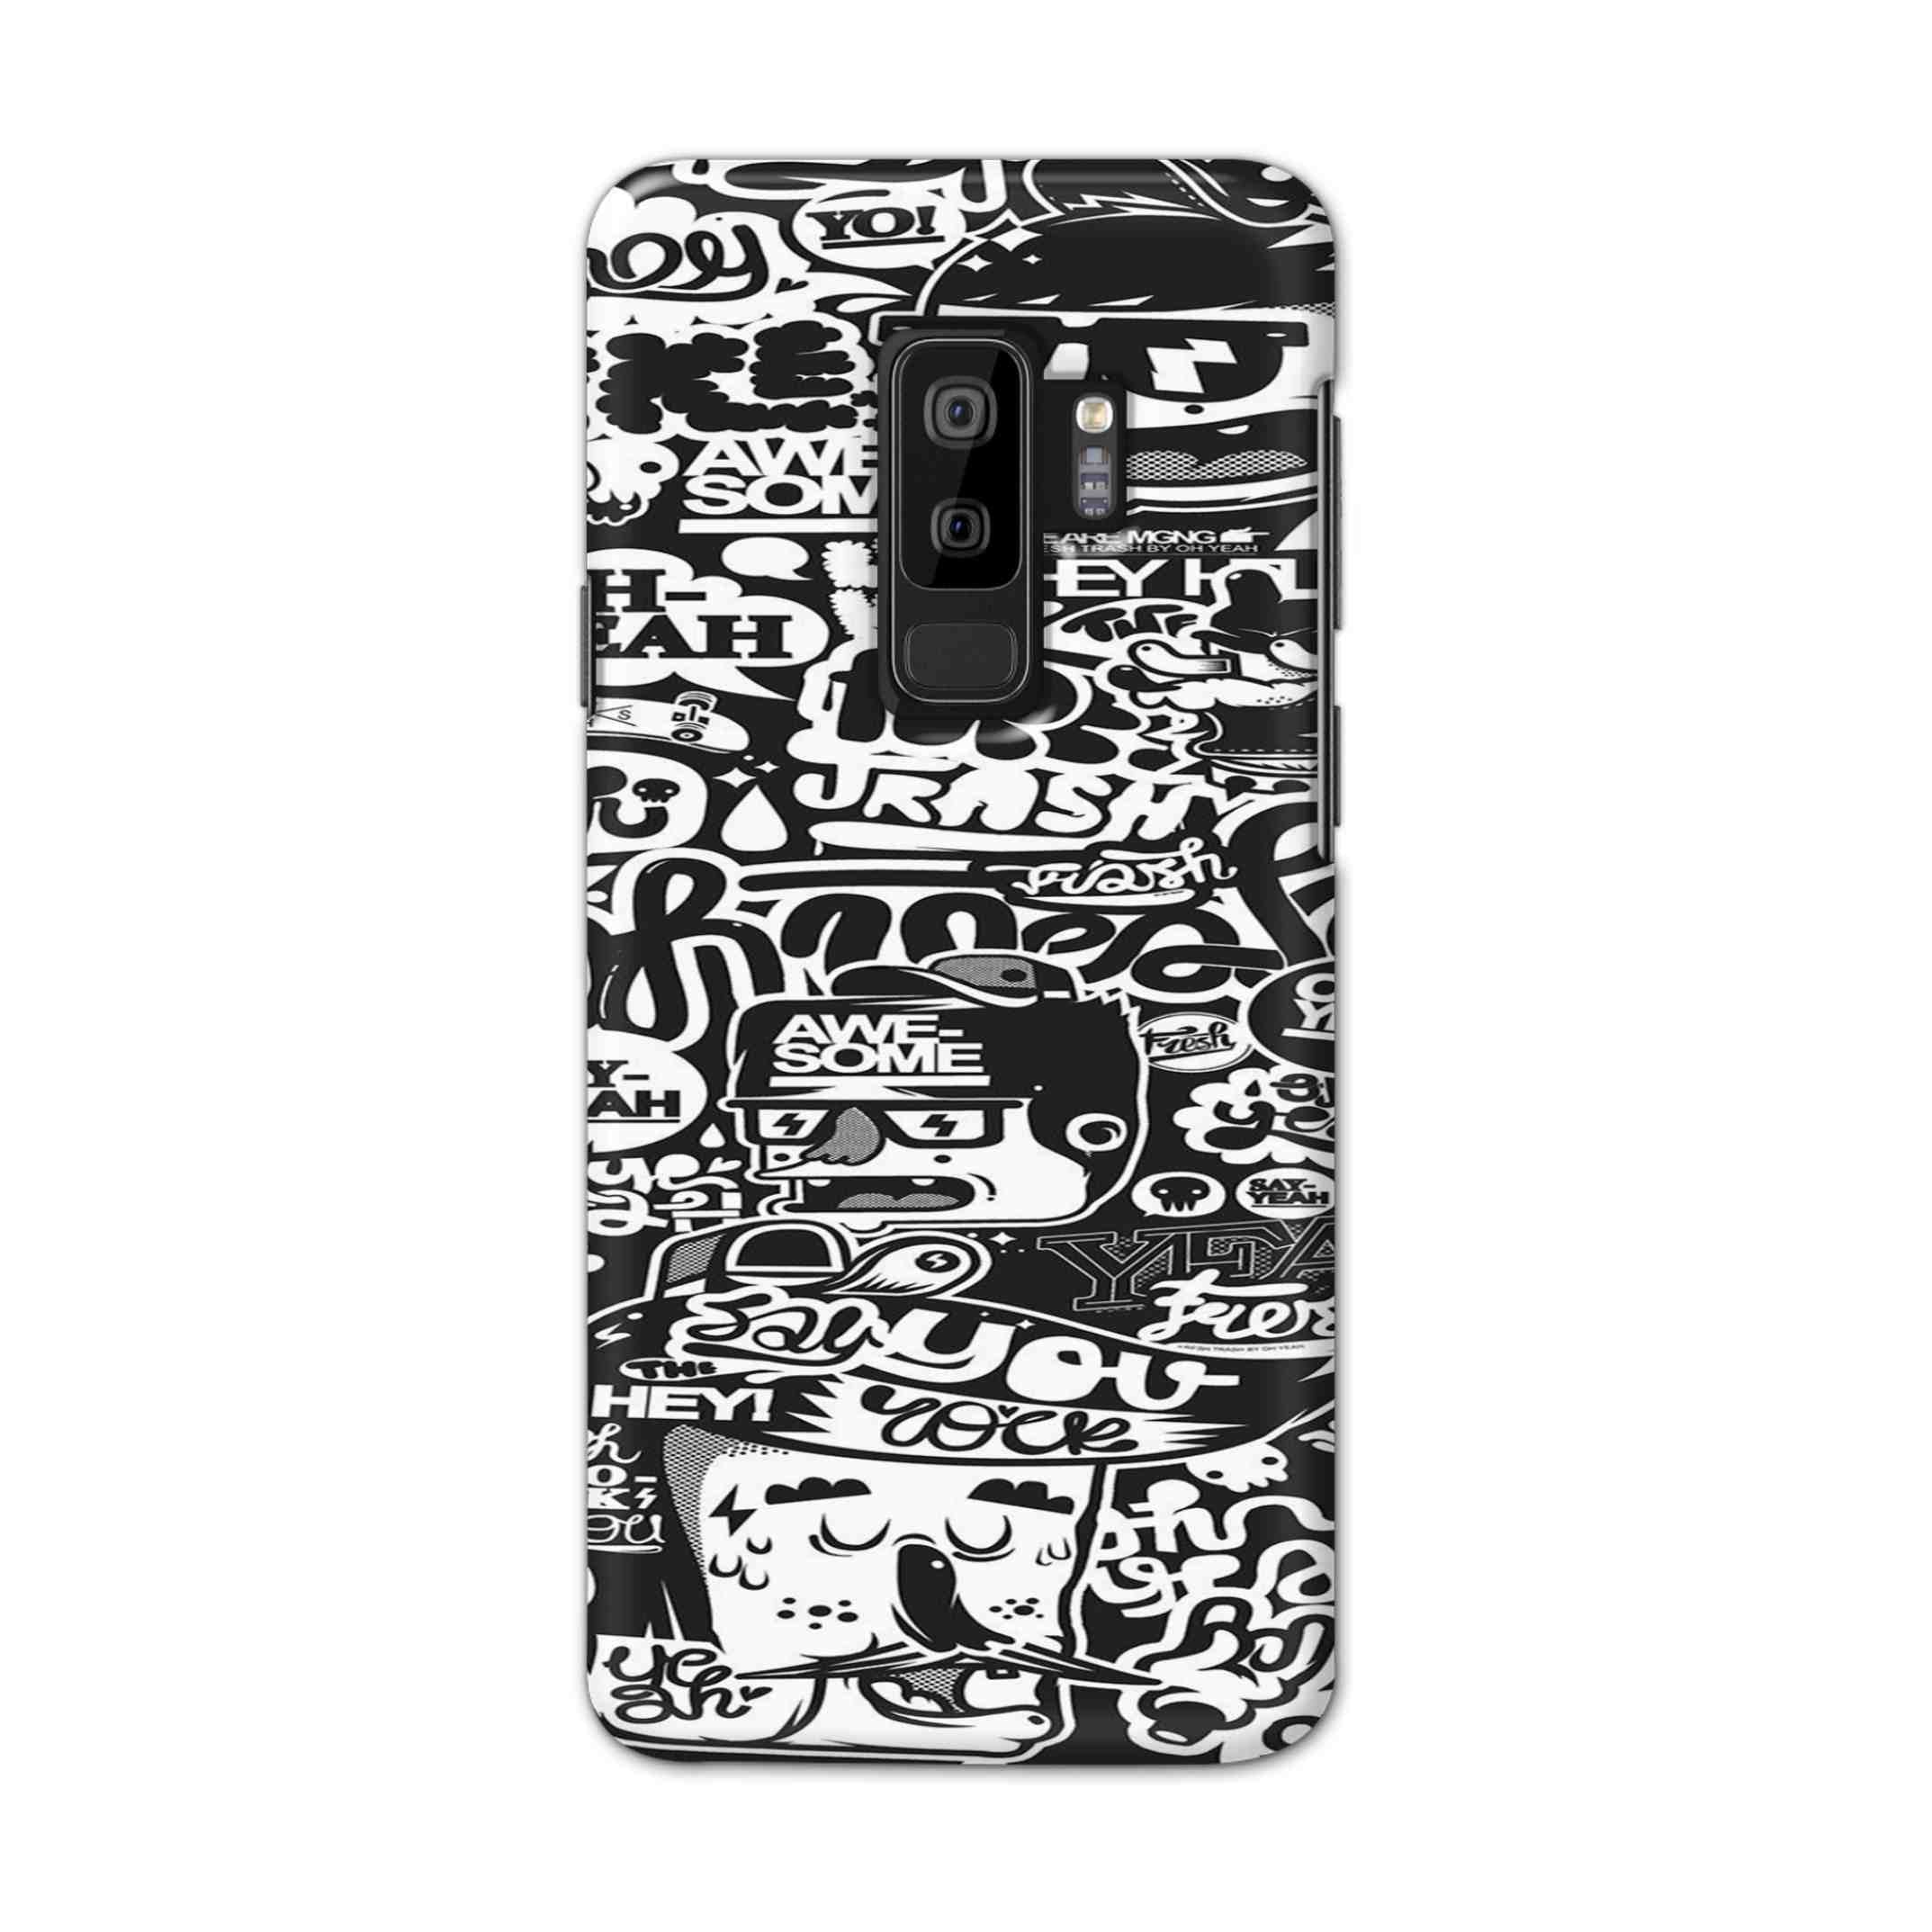 Buy Awesome Hard Back Mobile Phone Case Cover For Samsung S9 plus Online